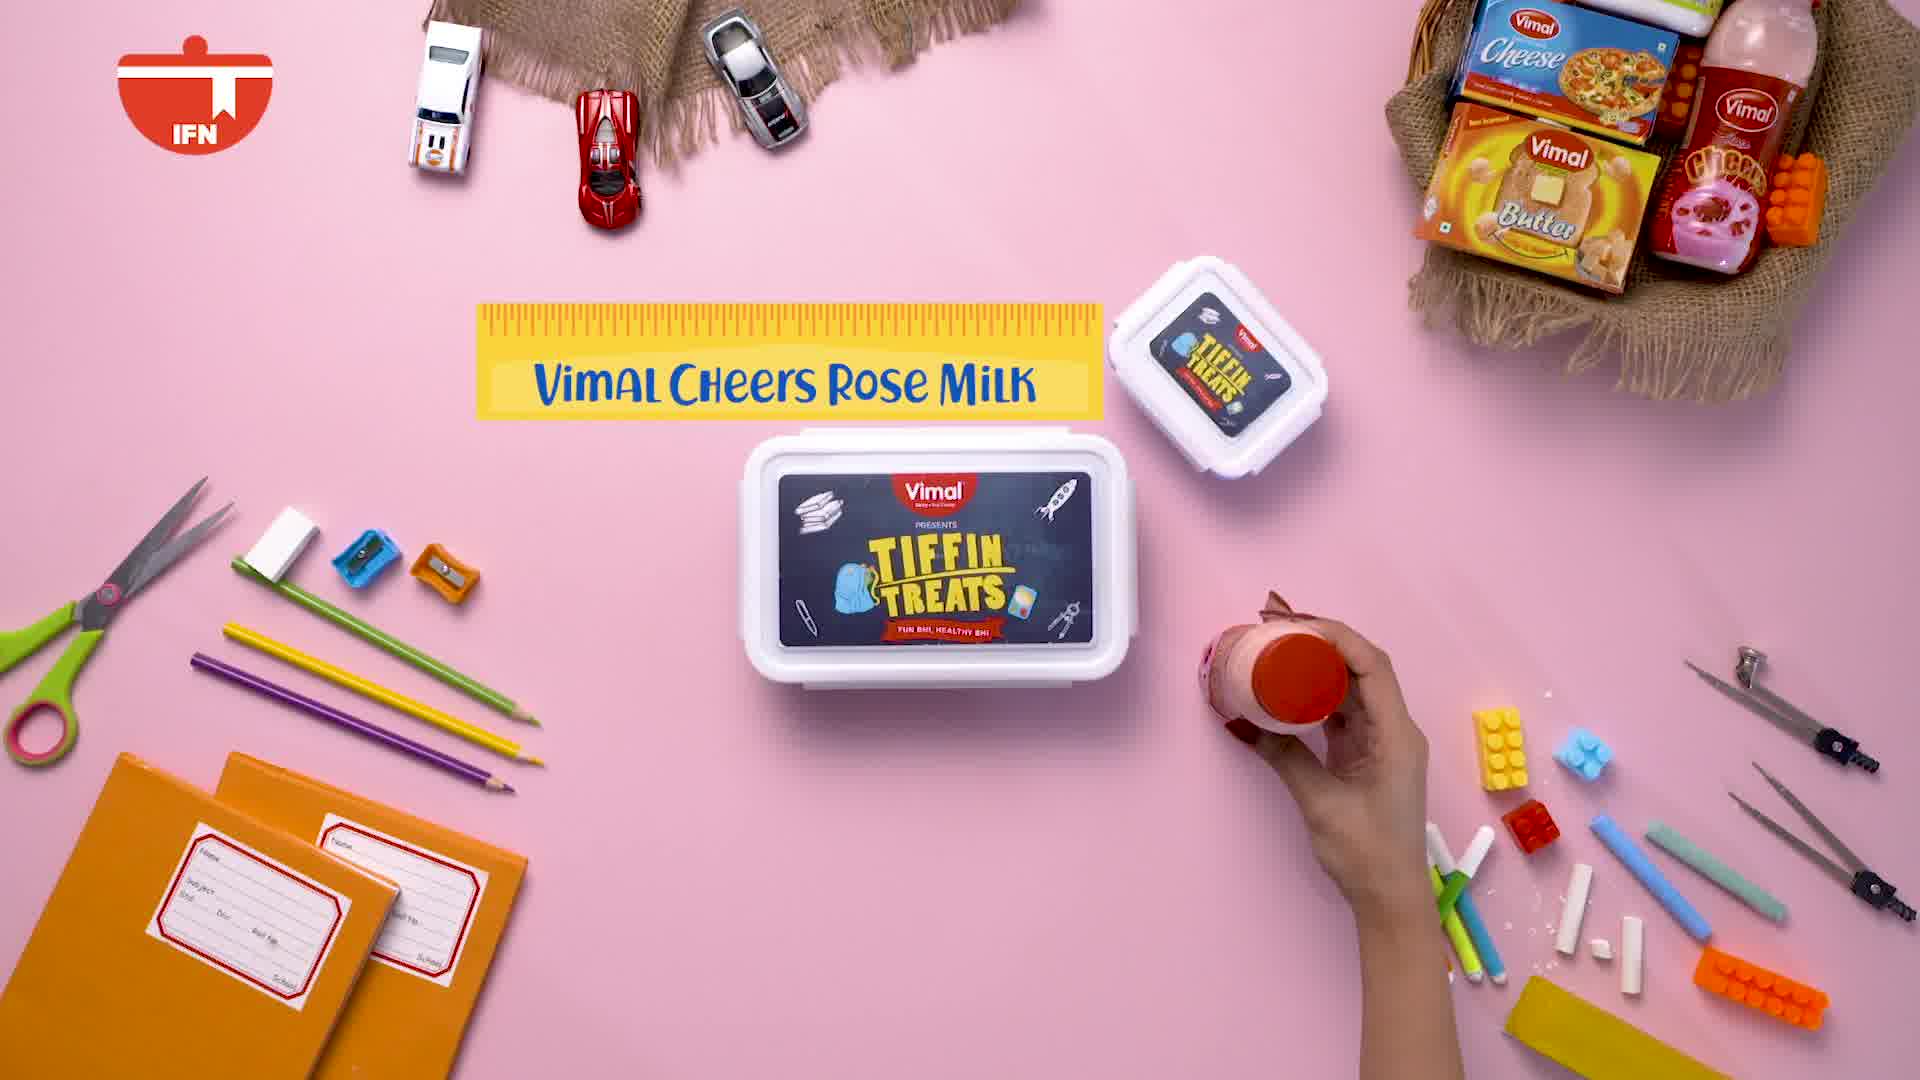 ::Tiffin Treats, Fun bhi, Healthy bhi::

See how beautifully you can do and add wonders to your little one's tiffin by turning the left-over roti into a yummy and delicious Roti Pizza. 

P.S. Don’t forget to add Vimal cheers rose milk to your little one’s tiffin box!
 
#TiffinTreats #Vimal #IceCream #VimalIceCream #Ahmedabad